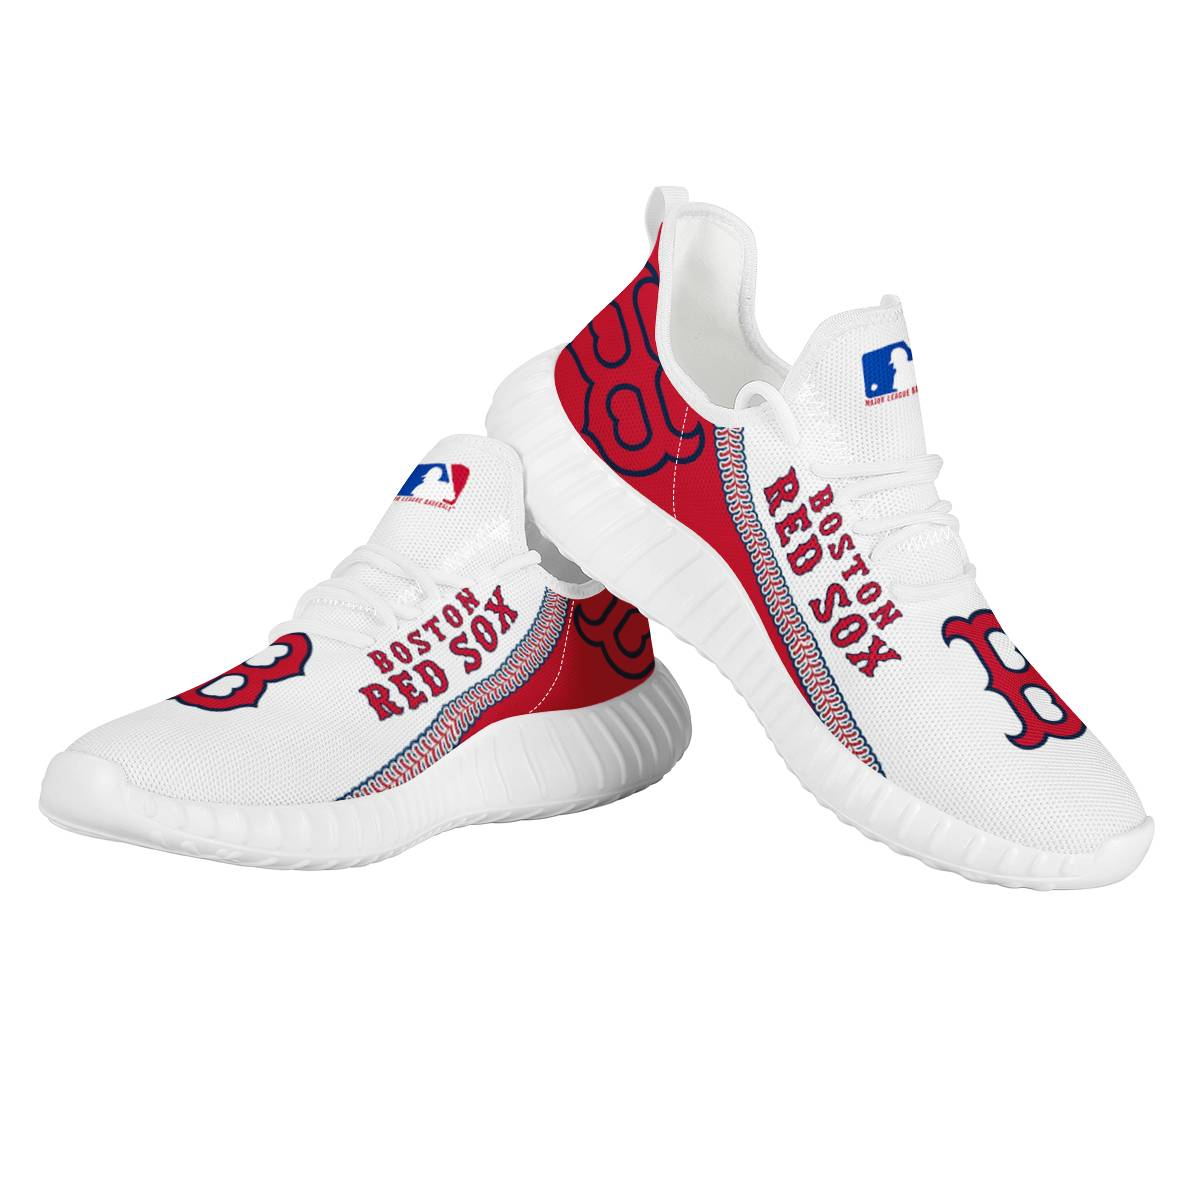 Women's MLB Boston Red Sox Mesh Knit Sneakers/Shoes 002